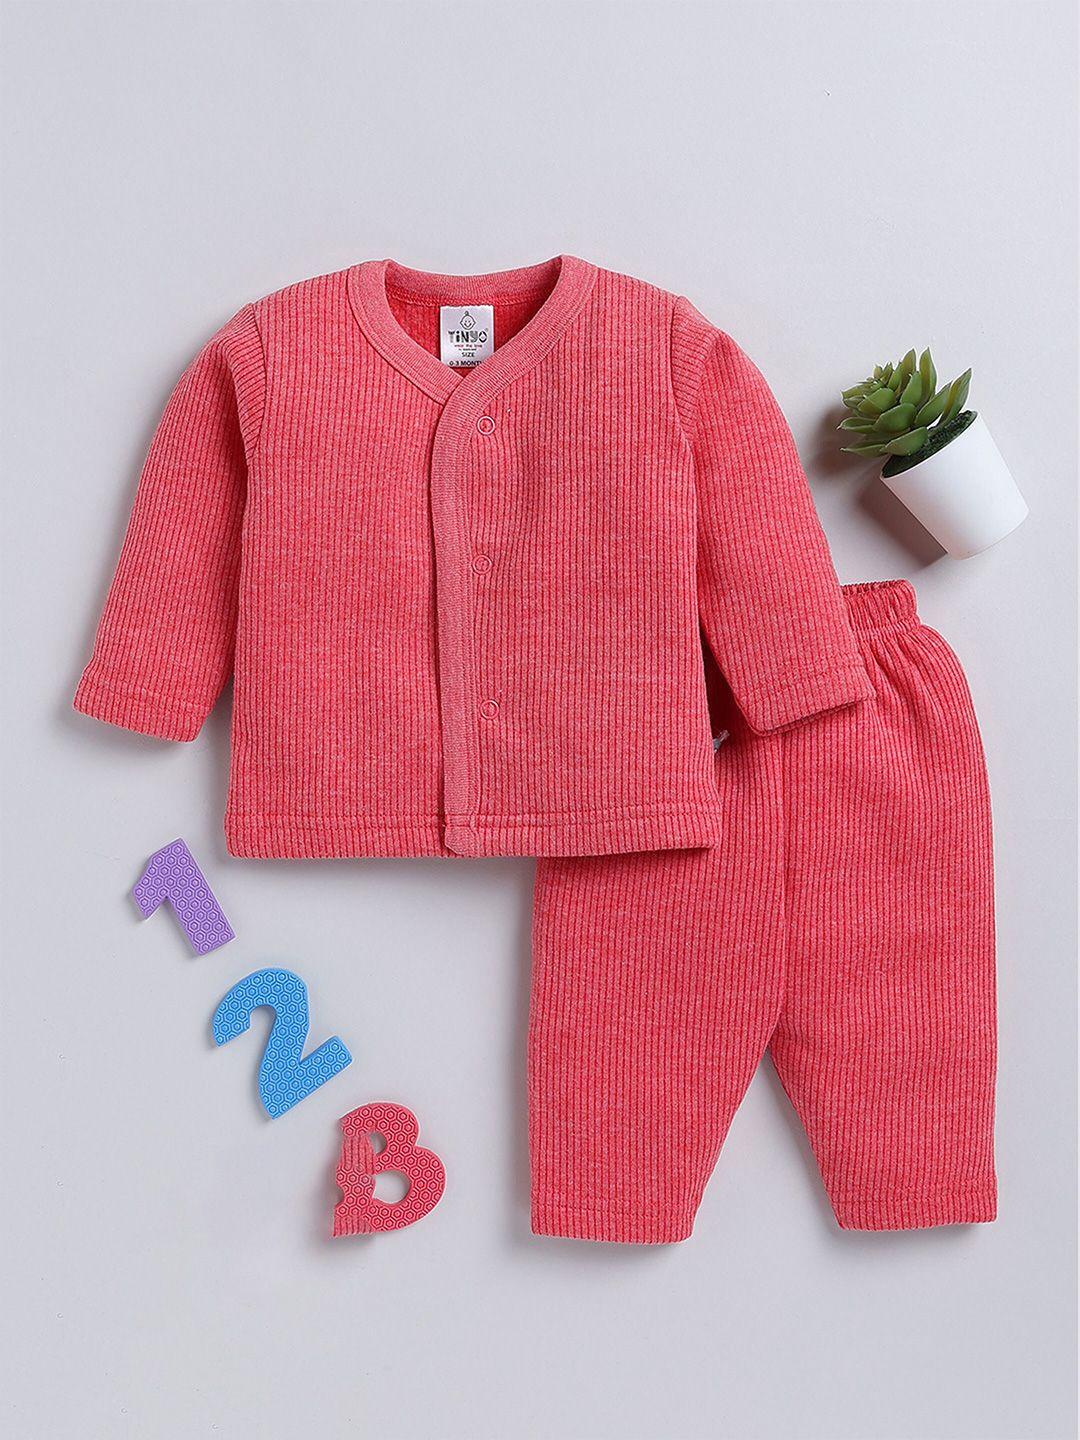 moms-love-unisex-kids-beige-striped-organic-cotton-cardigan-with-trousers